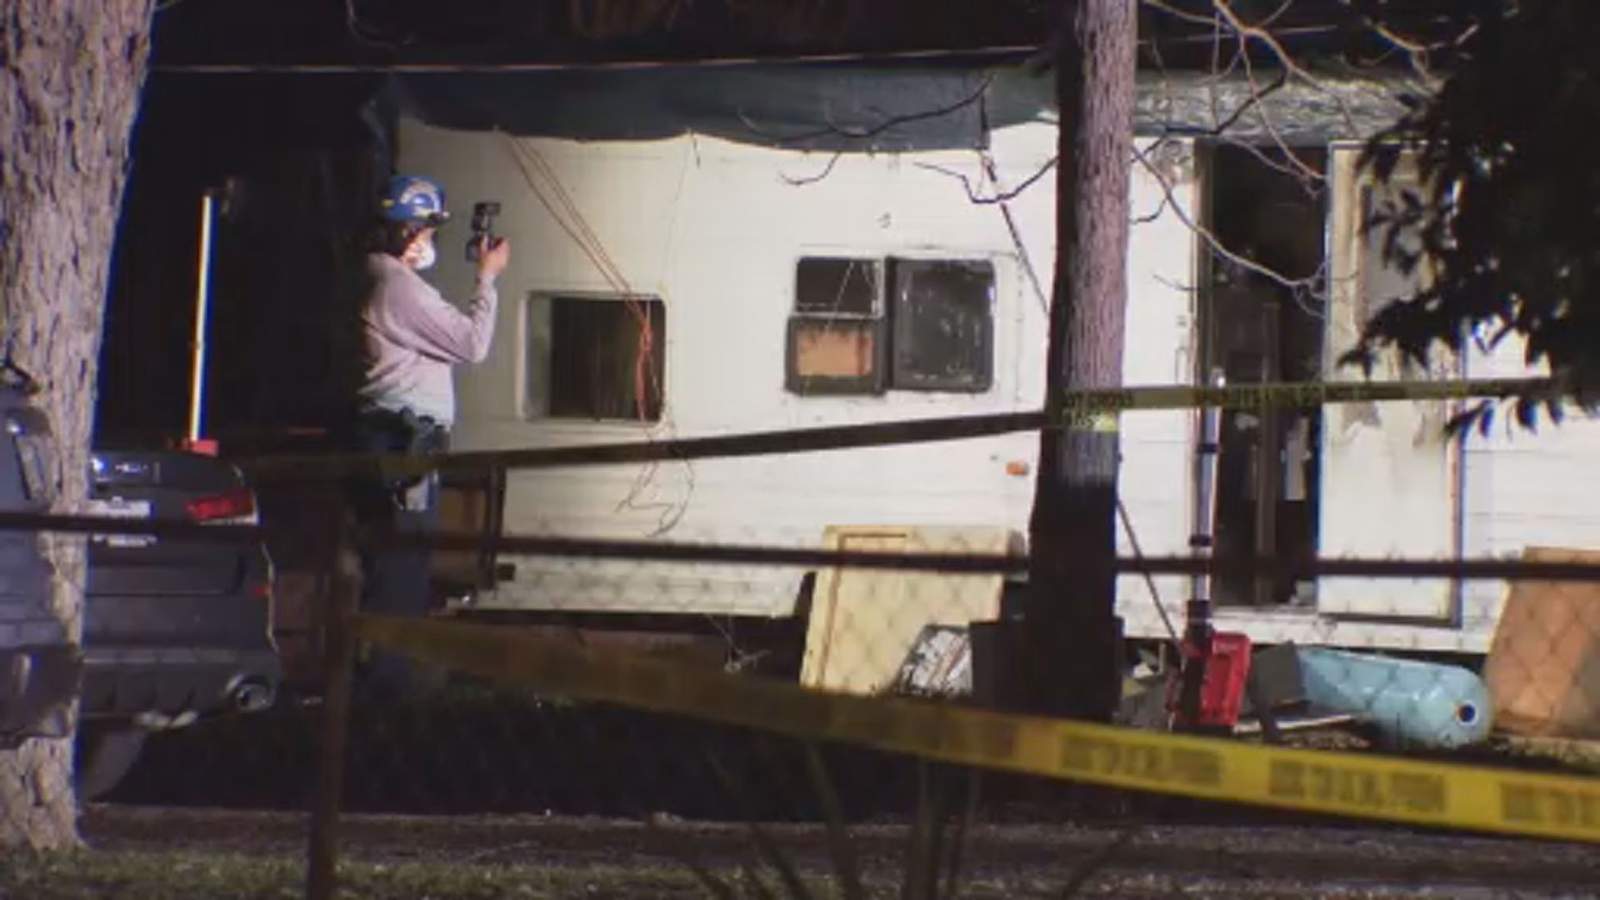 Man dead, woman injured after trailer fire in Channelview